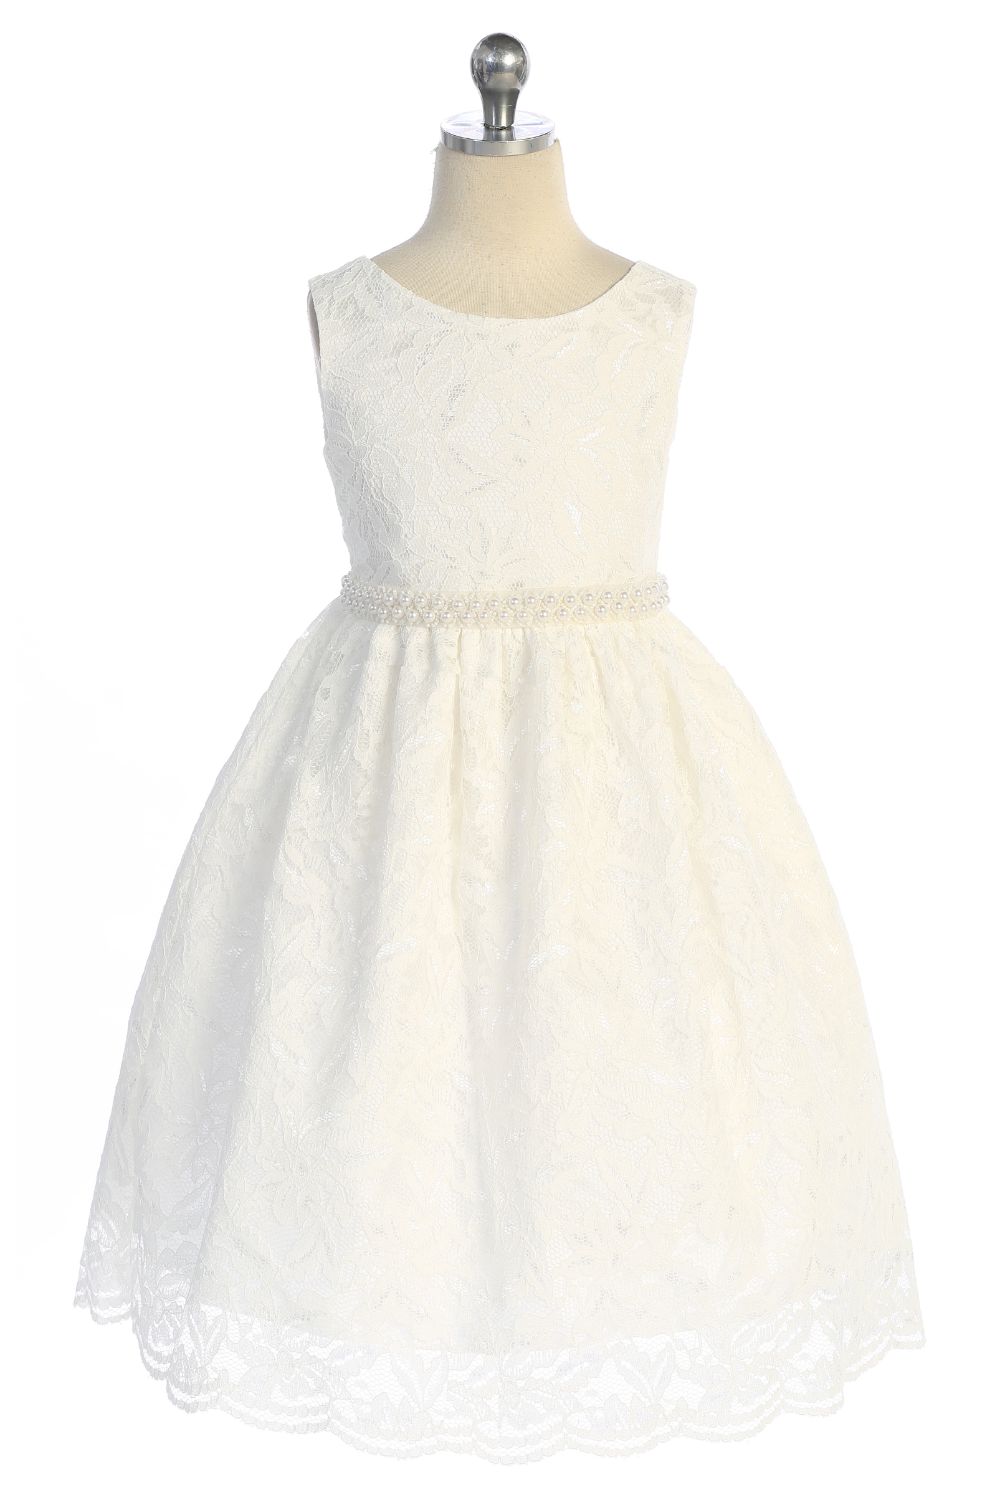 Lace V Back Bow with Thick Pearl Trim Girl Party Dress by AS526-C Kids Dream - Girl Formal Dresses